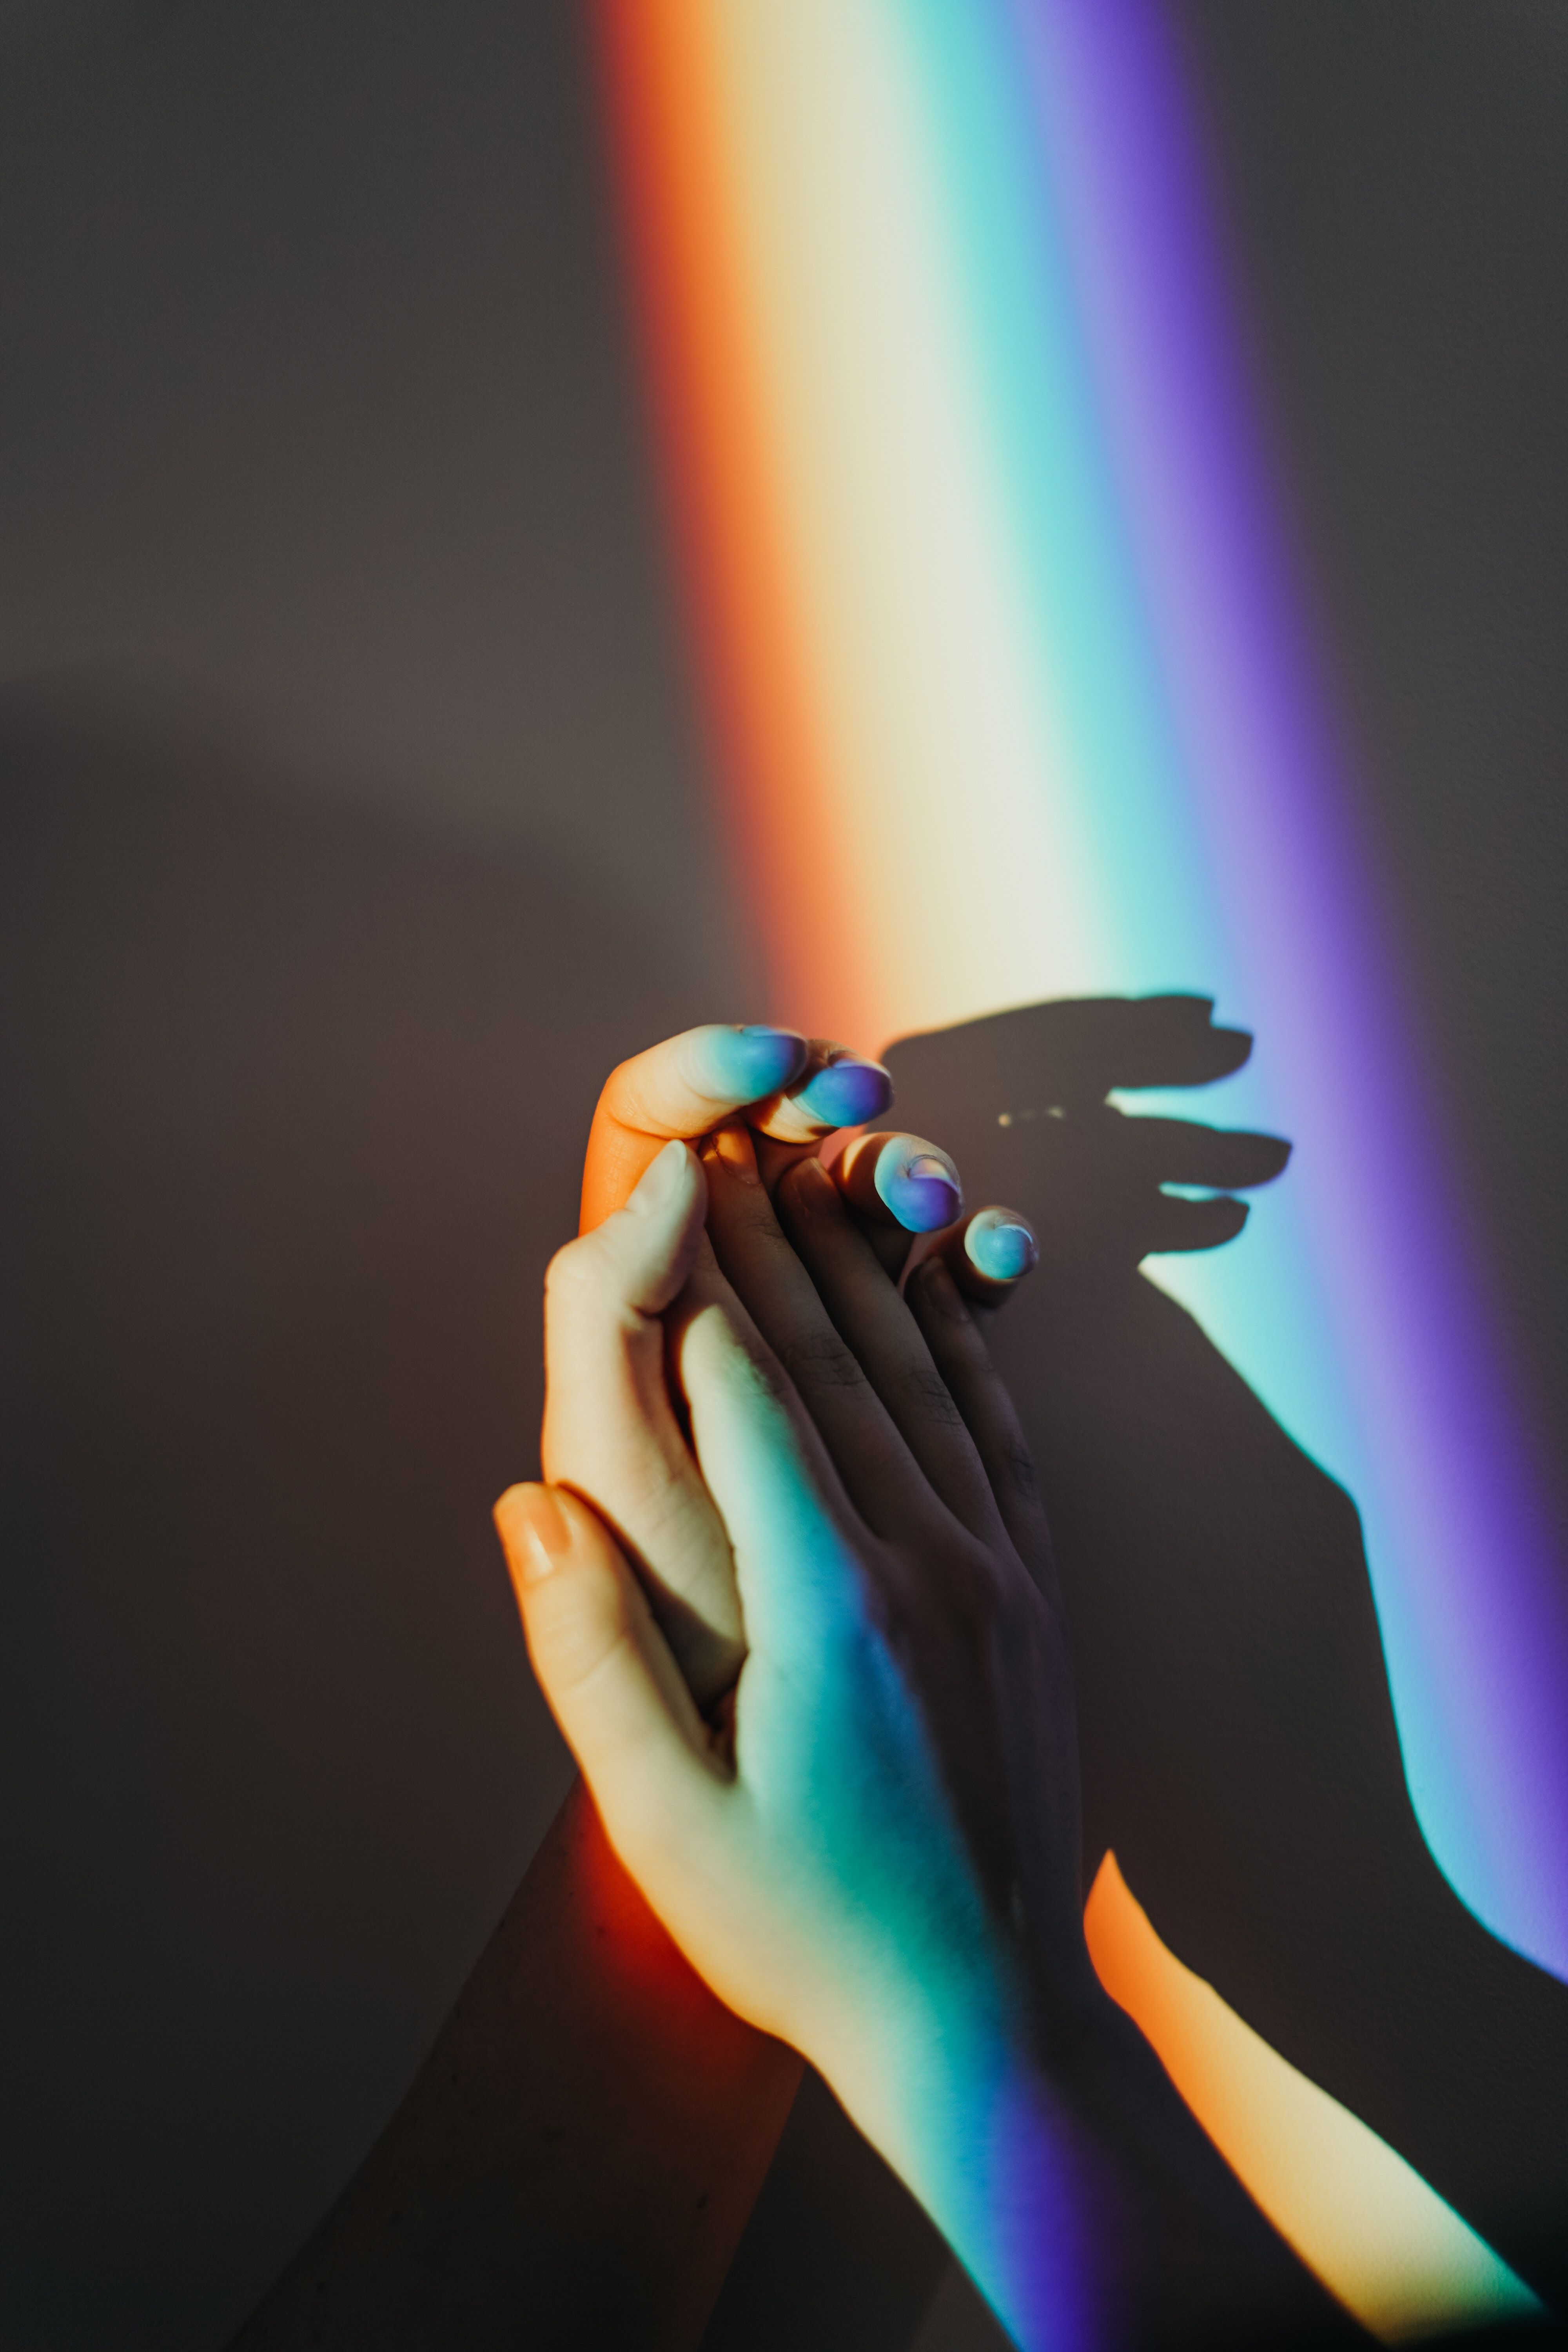 Persons Hands With Rainbow Colors · Free